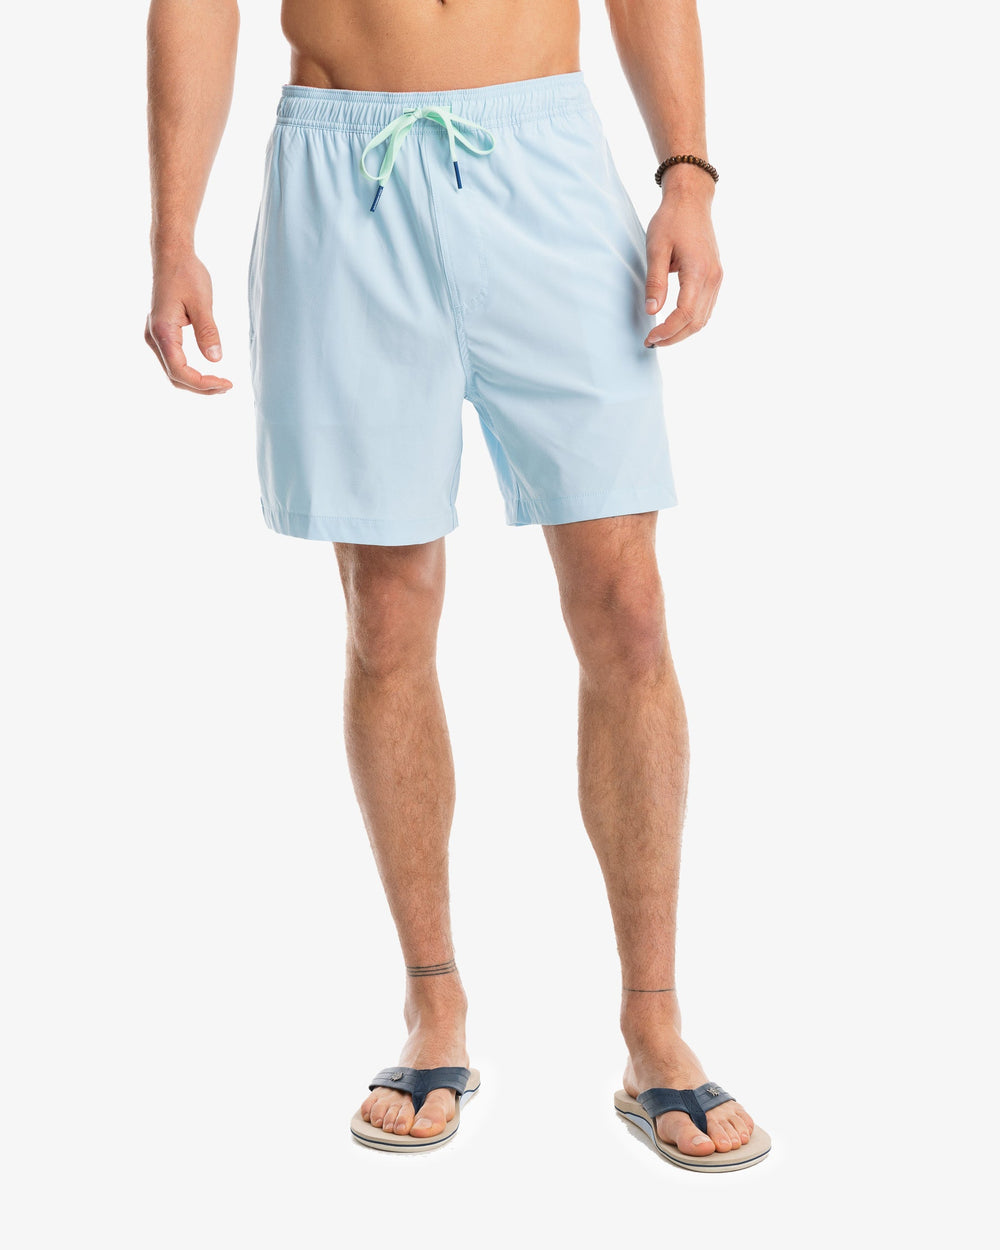 The model front view of the Men's Solid Swim Trunk by Southern Tide - Aquamarine